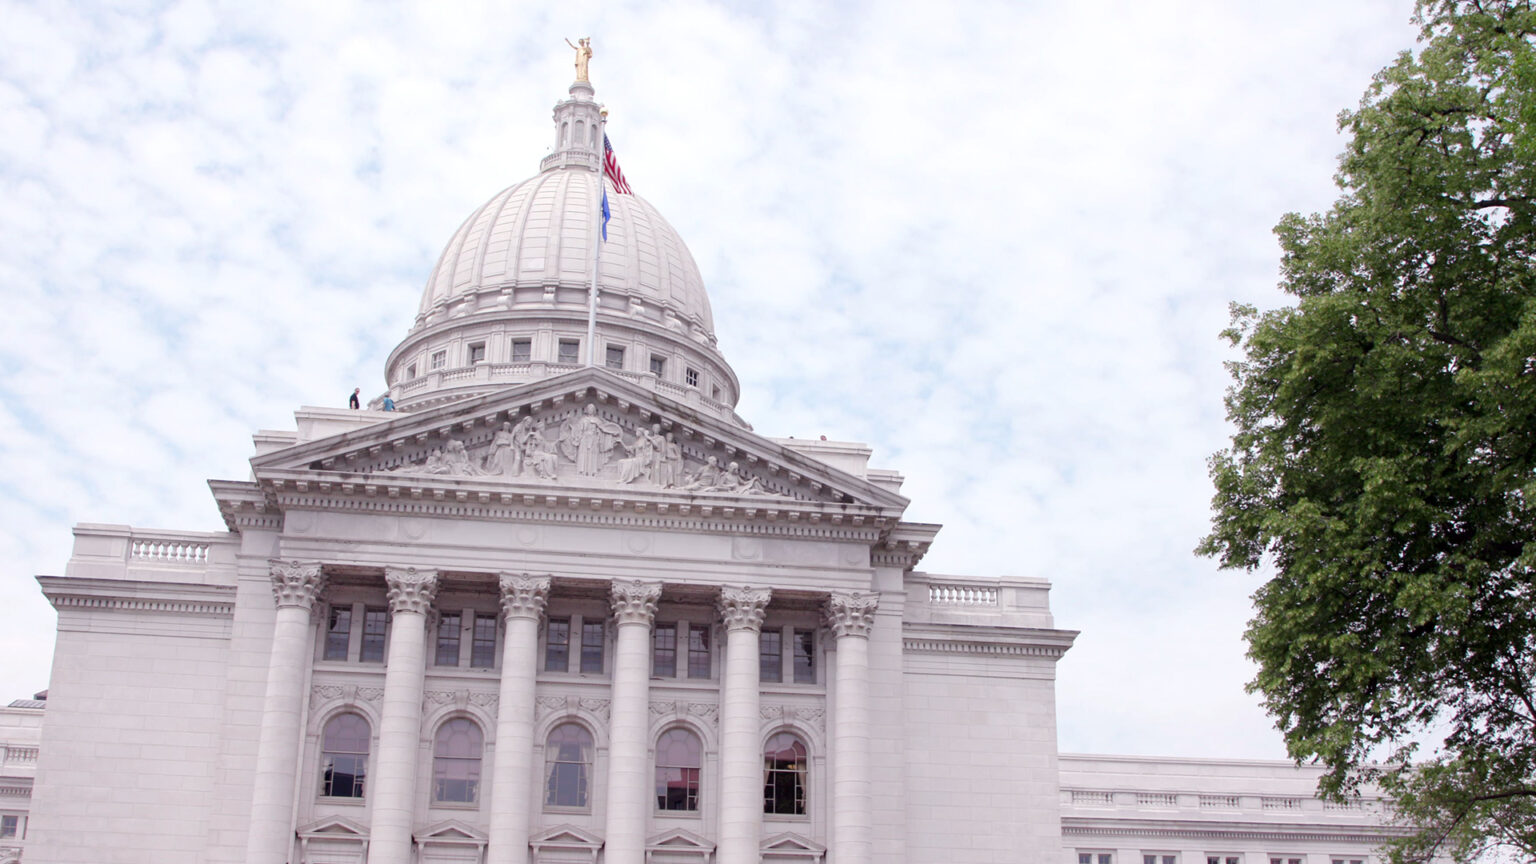 The U.S. and Wisconsin flags fly atop a flagpole on one wing of the Wisconsin Capitol building, framed by its dome in the background and a tree in the foreground.